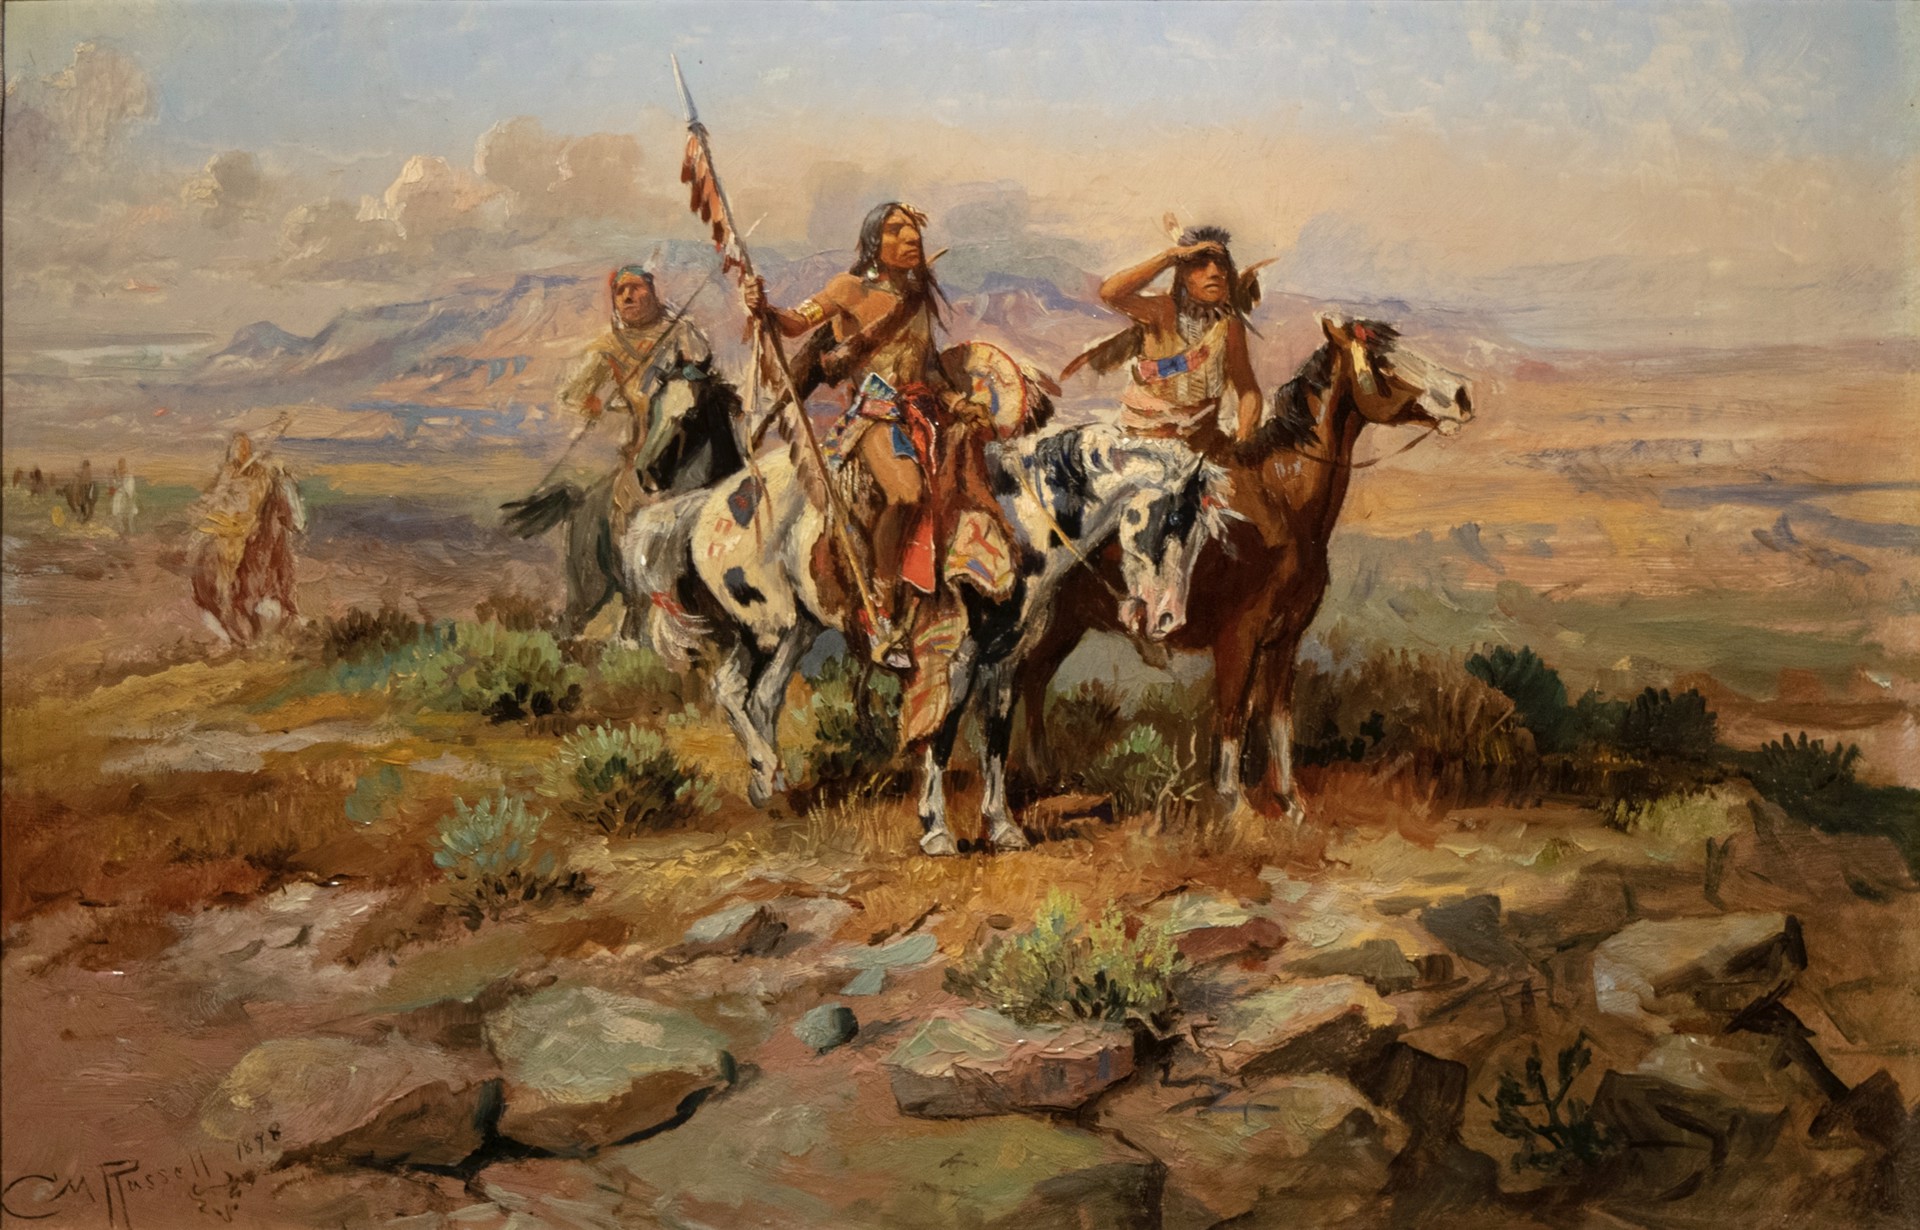 THE WAR PARTY by Charles M. Russell [1864-1926]